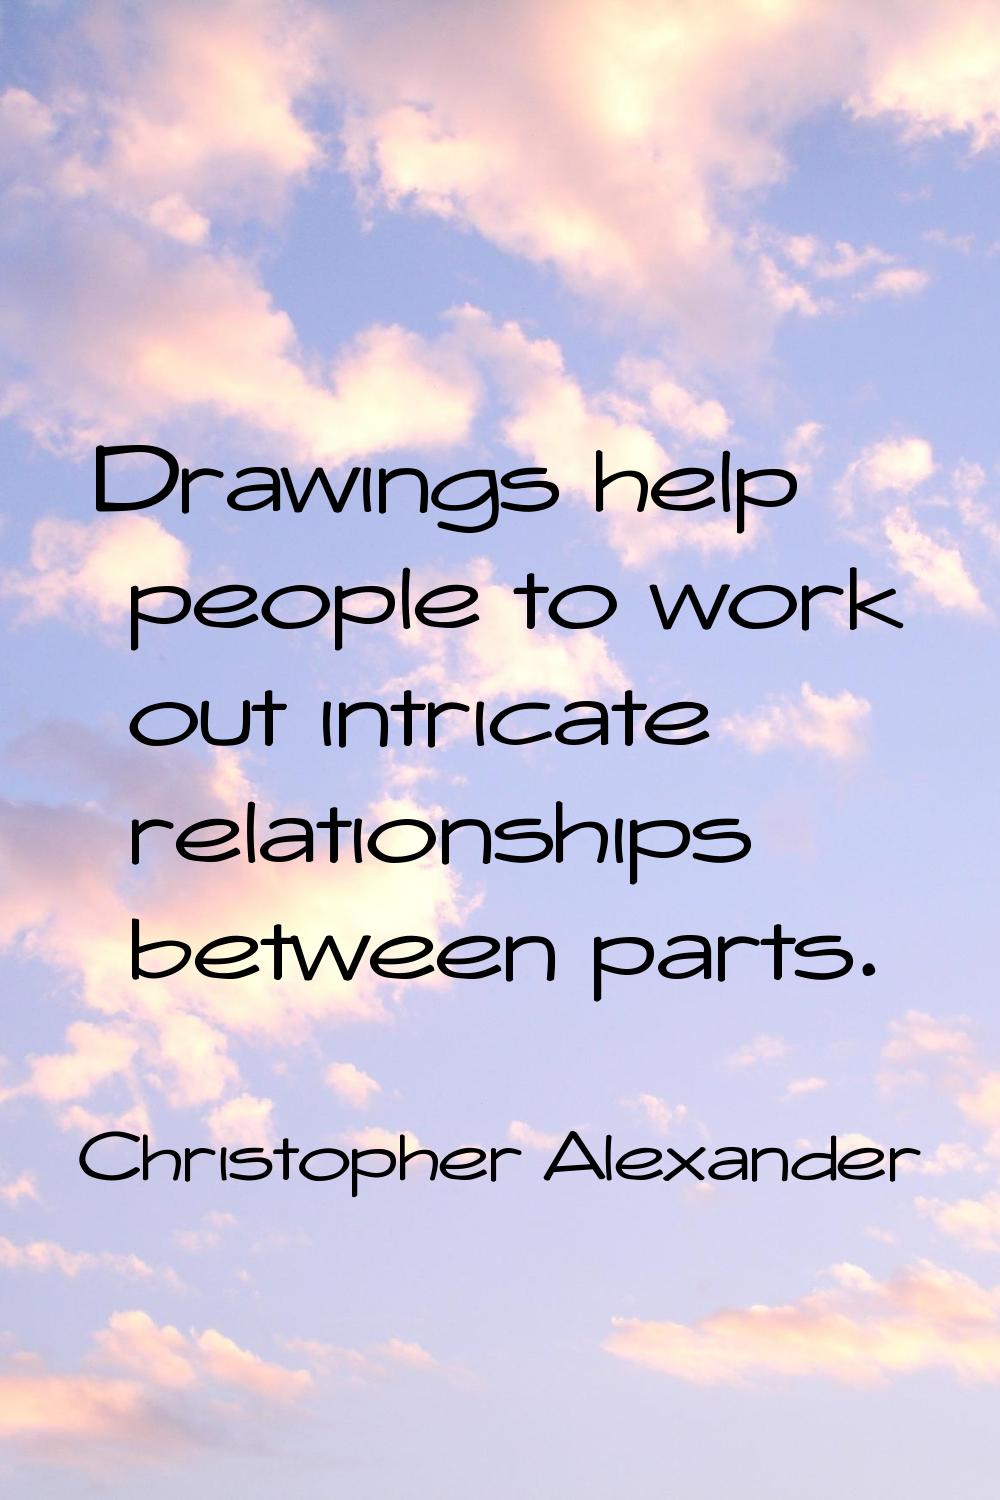 Drawings help people to work out intricate relationships between parts.